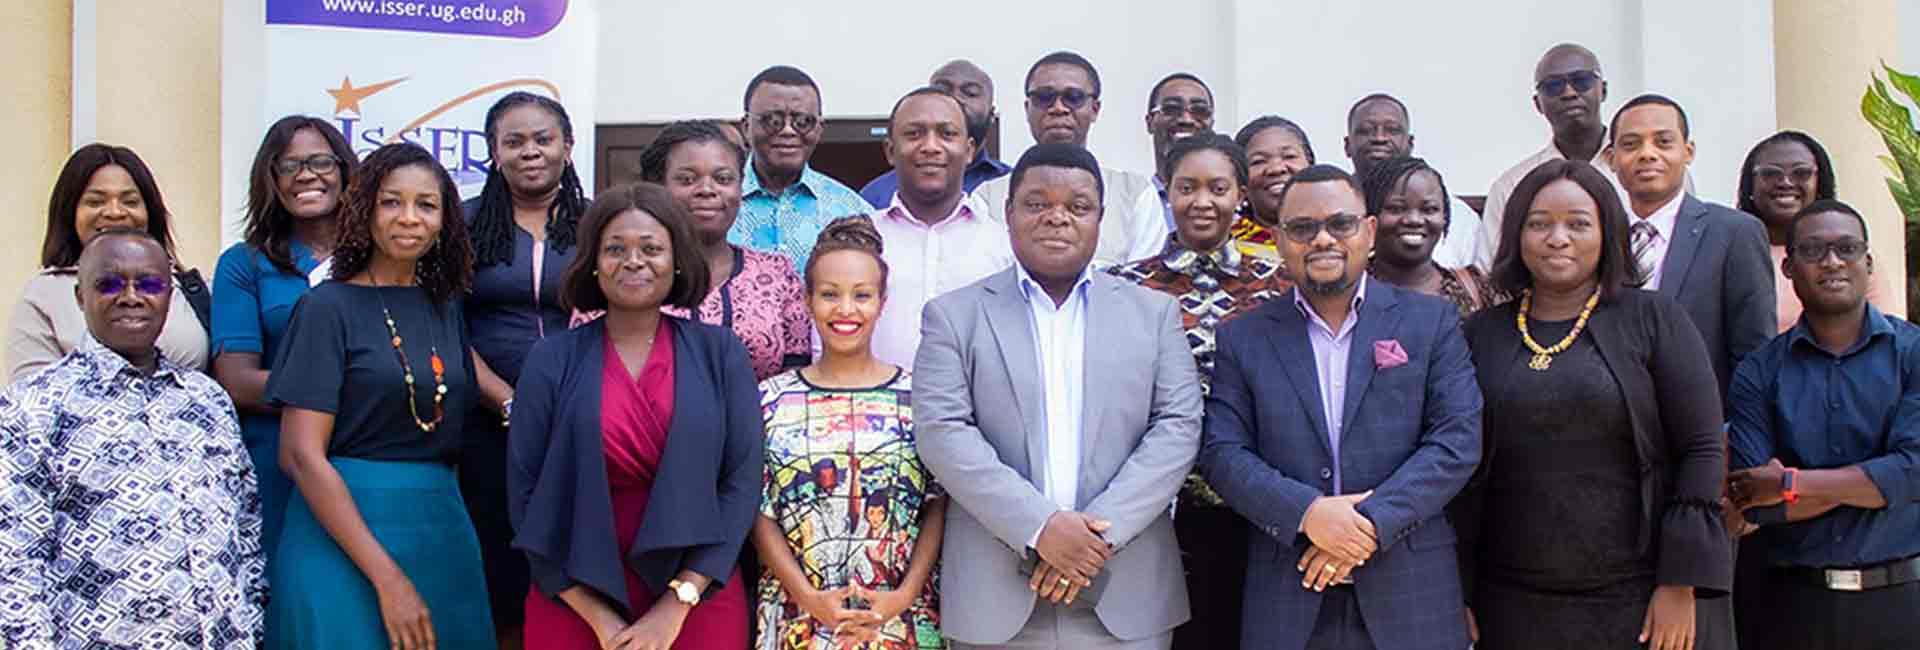 ISSER partners Development Initiatives in engaging Ghanaian stakeholders on global public investment